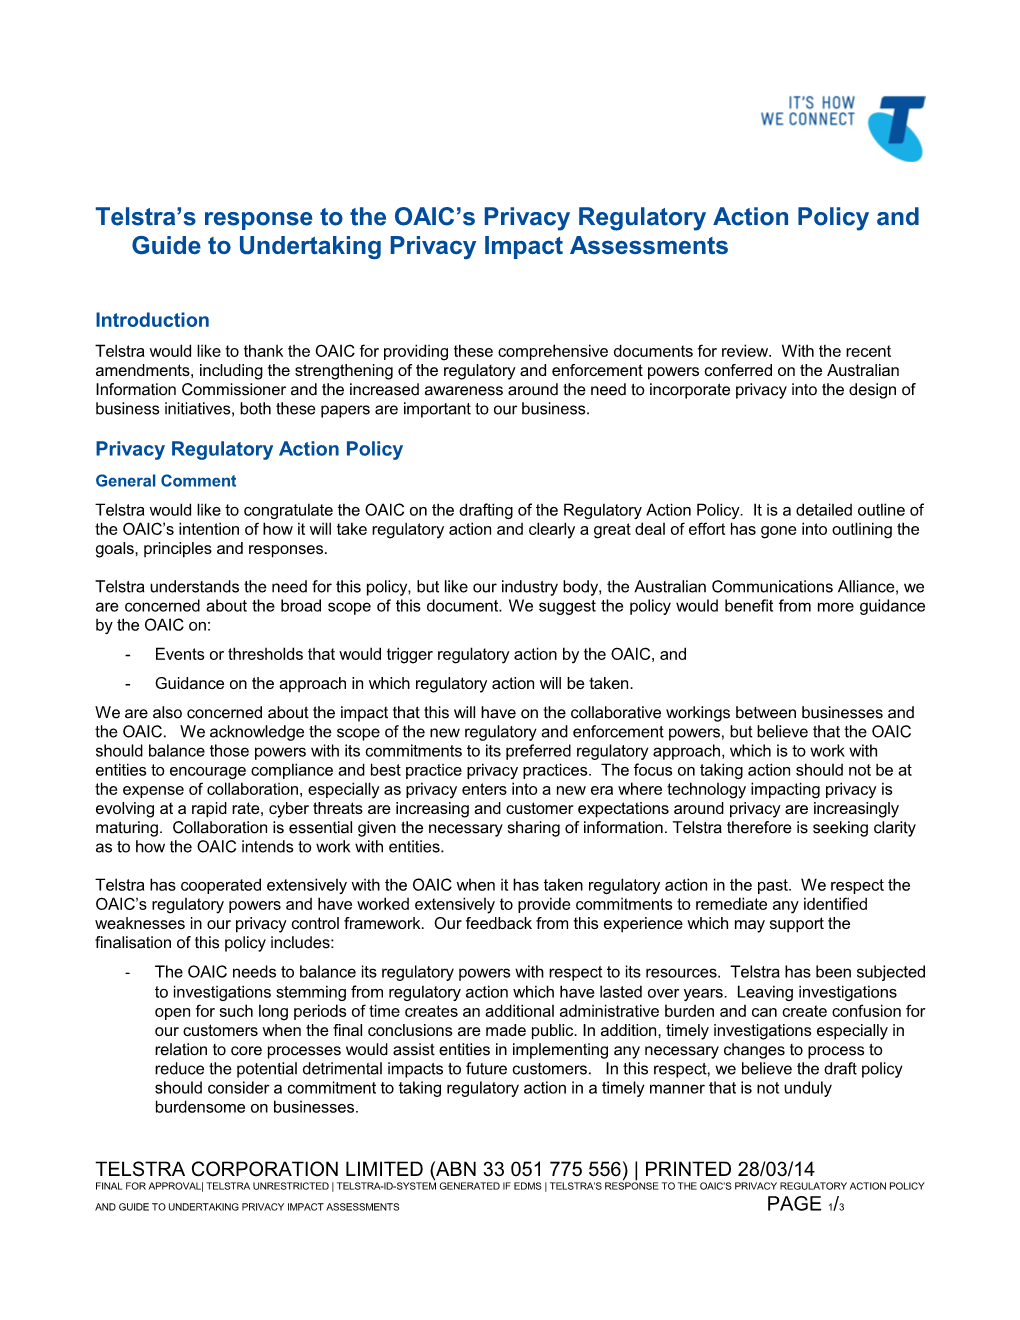 Telstra S Response to the OAIC S Privacy Regulatory Action Policy and Guide to Undertaking